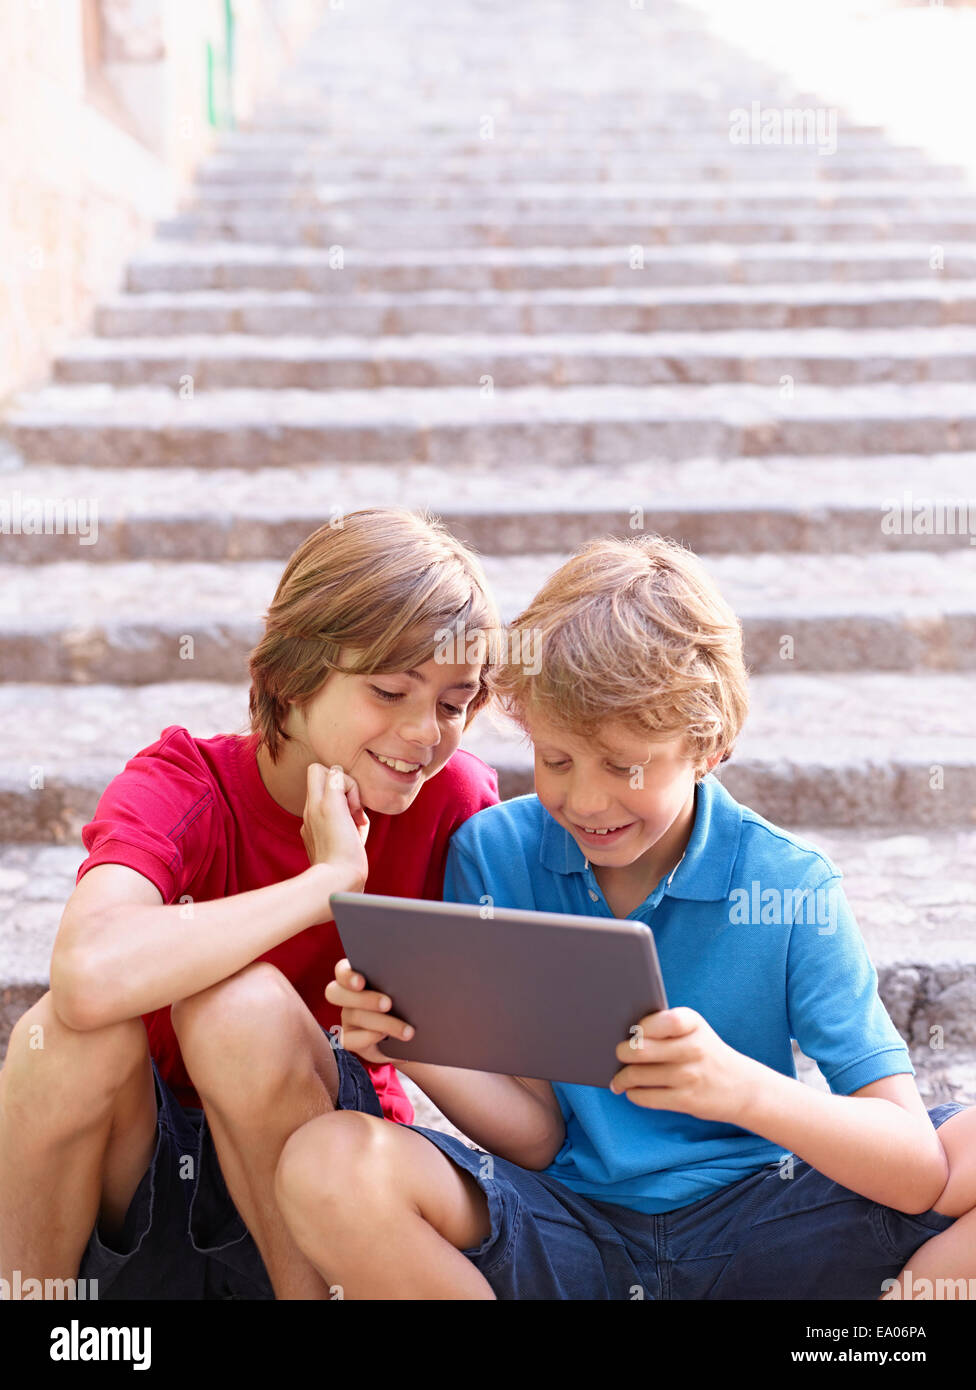 Brothers looking at digital tablet on village steps, Majorca, Spain Stock Photo